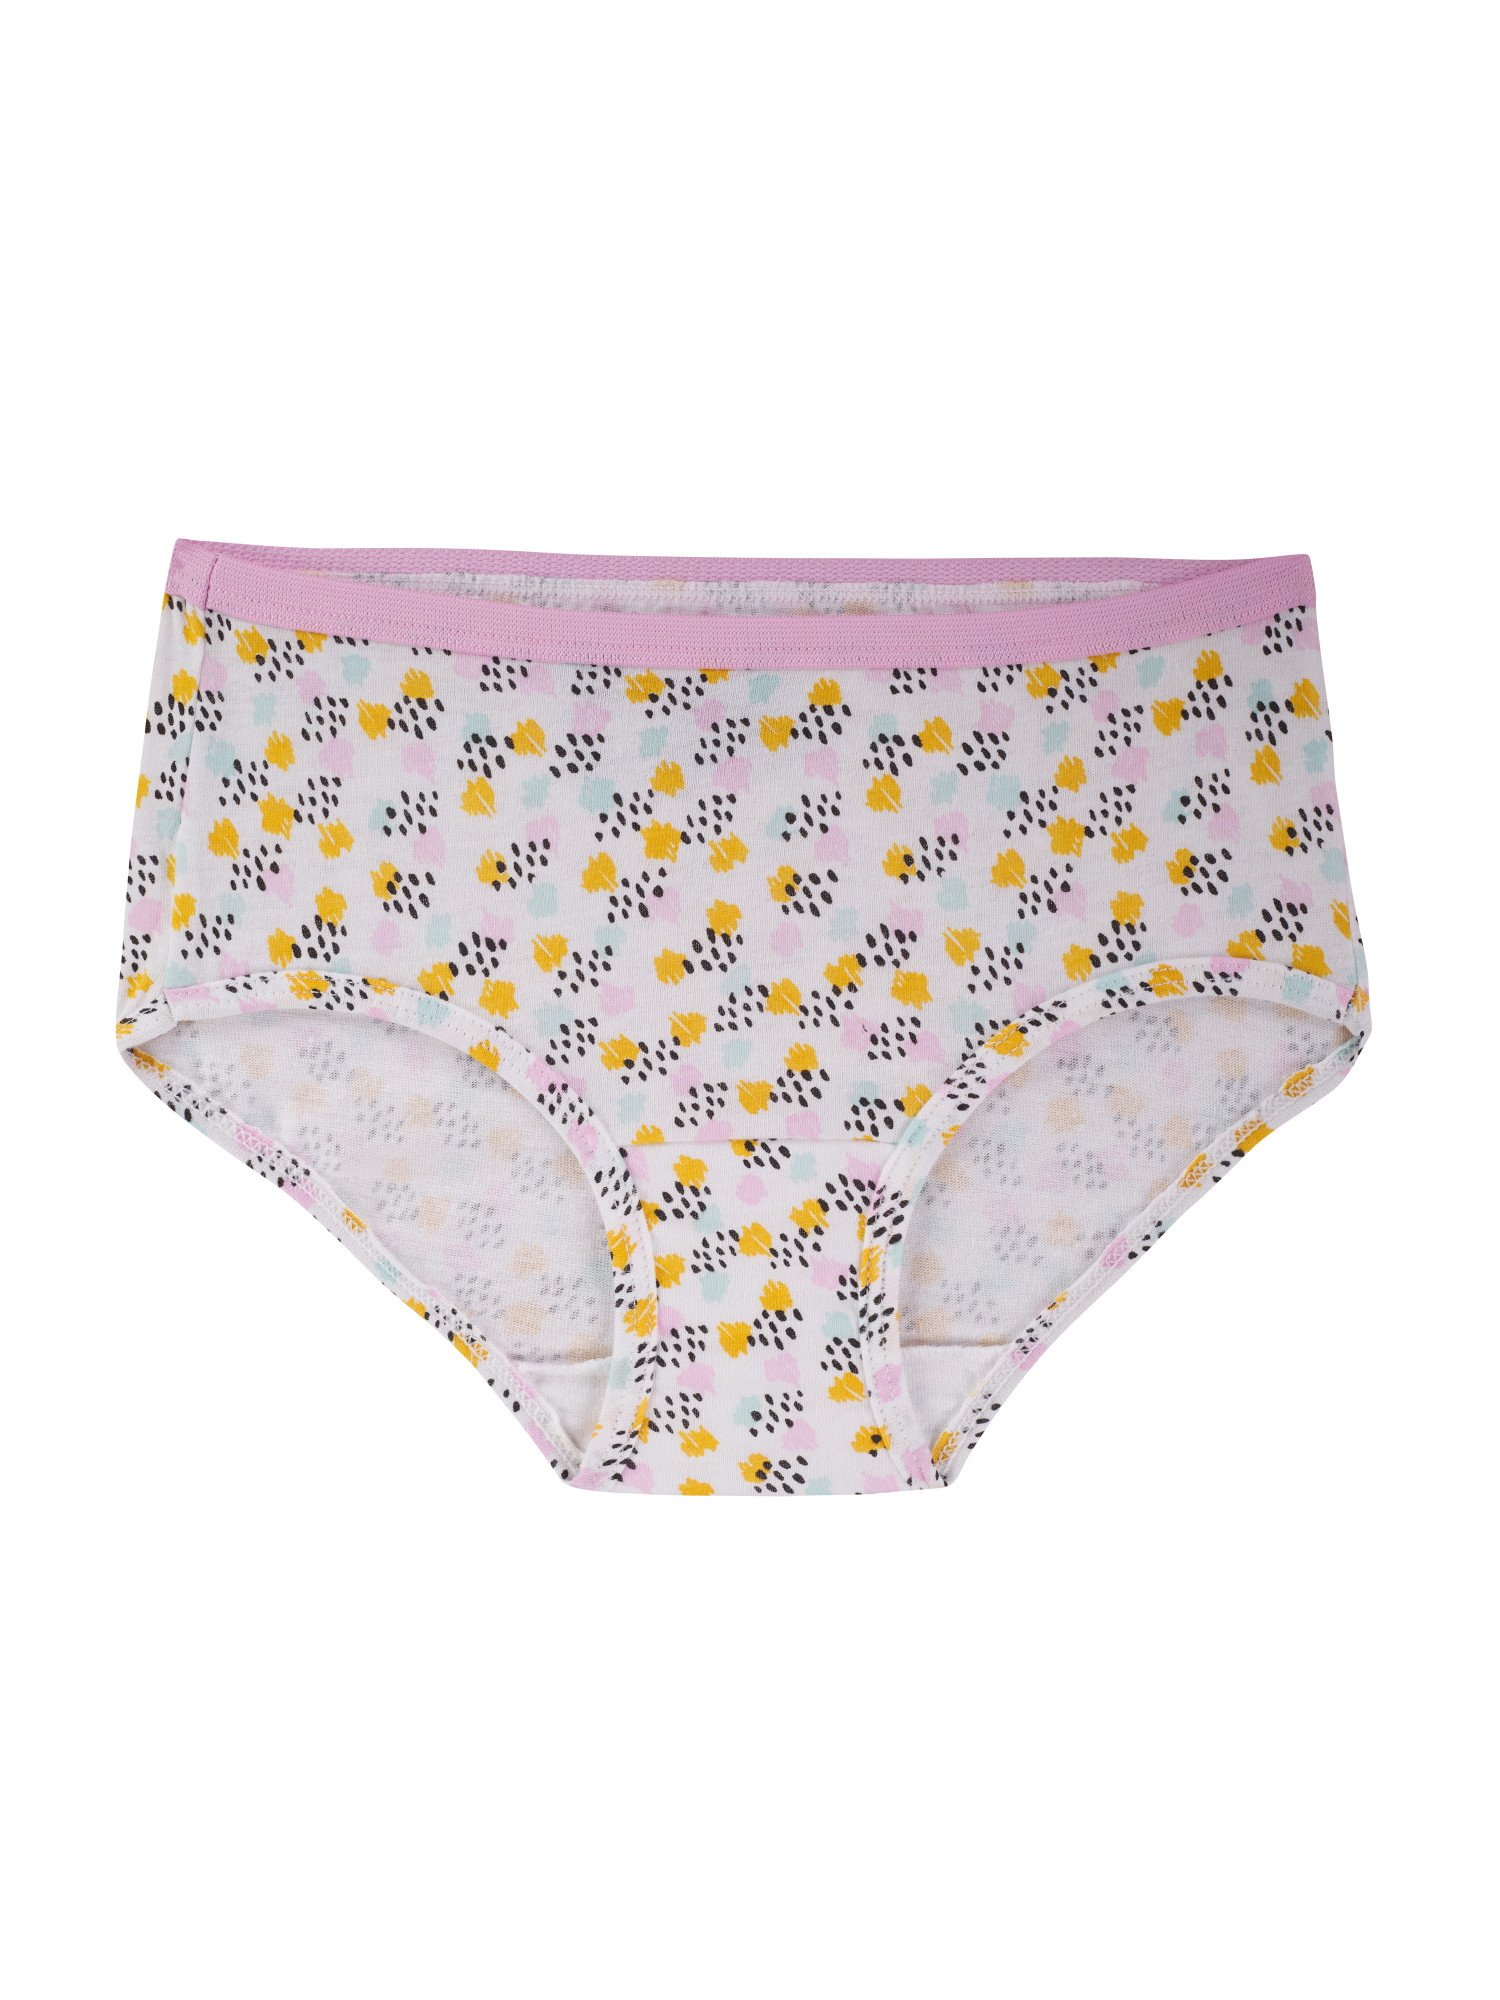 Fruit of the Loom Girls' Cotton Brief Underwear, 20 Pack - image 3 of 10